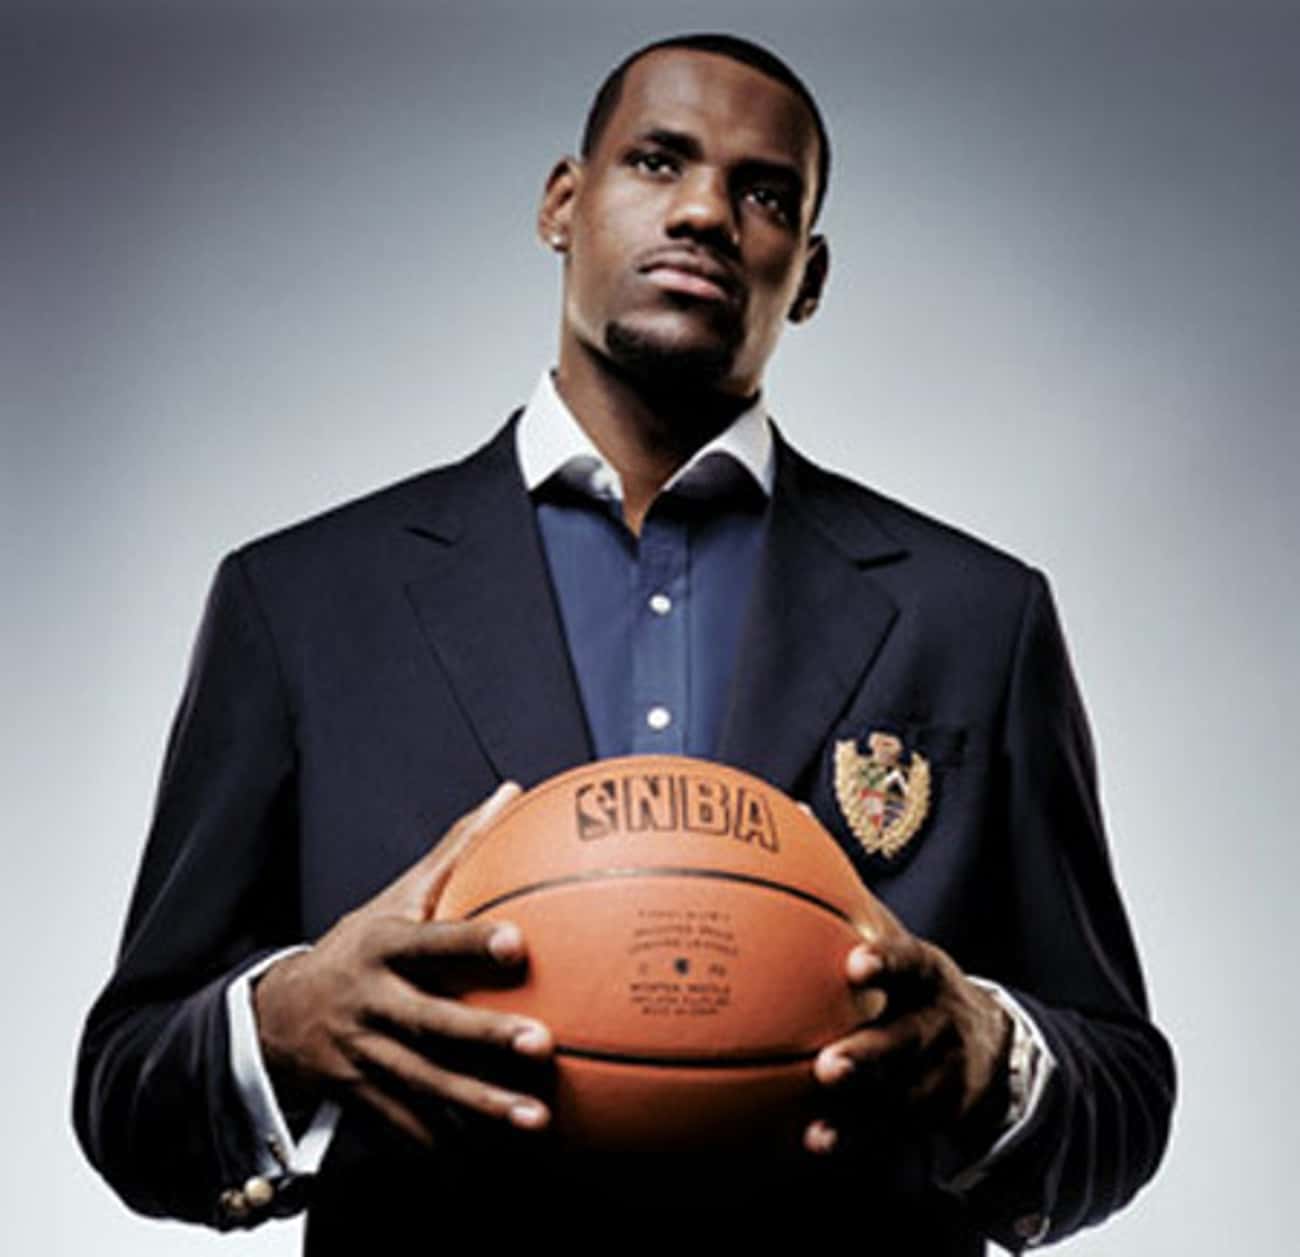 Young LeBron James in Black Sports Coat and Buttondown